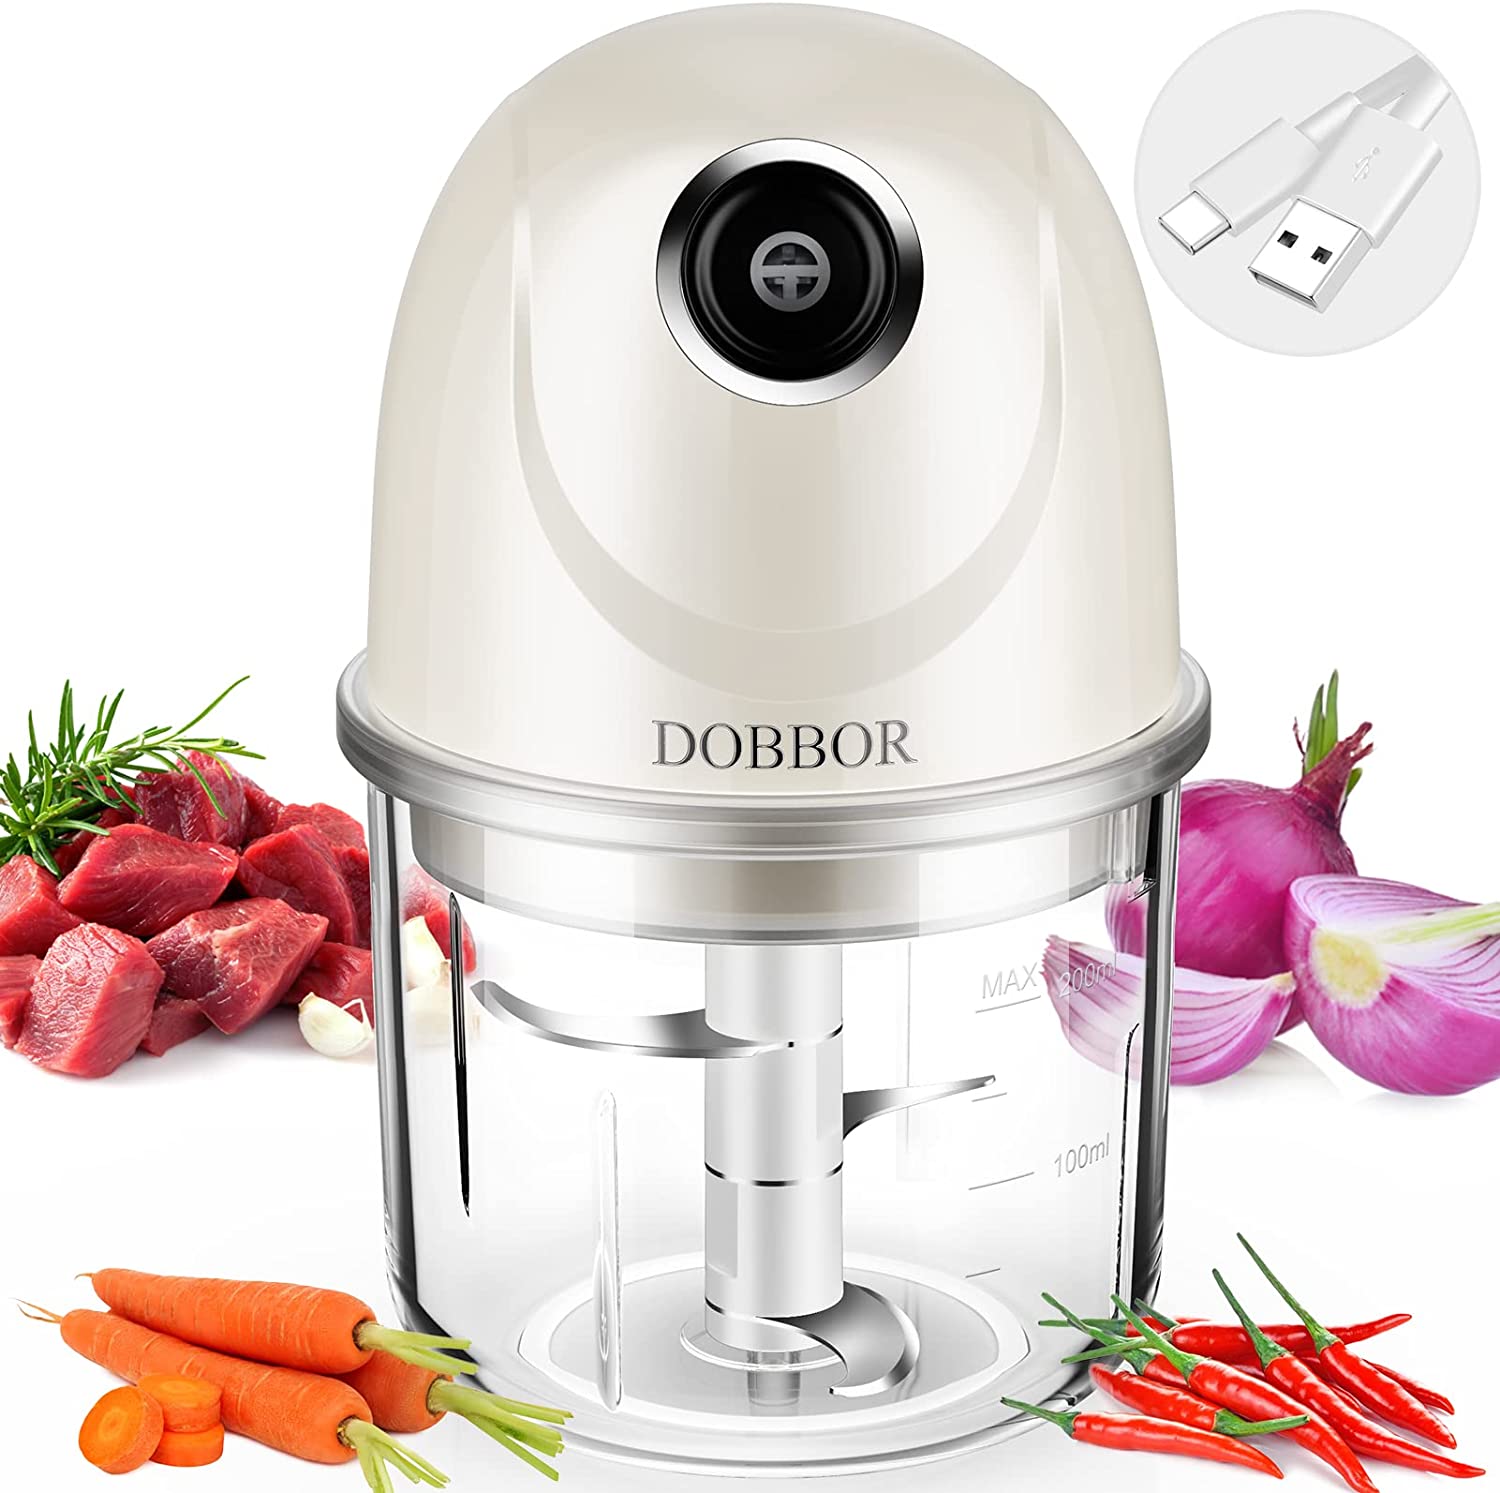 Mini Electric Chopper, DOBBOR Rechargeable Food Processor Mixer with 200 ml Container, Wireless Kitchen Processor for Cutting Fruit, Onions, Garlic, Vegetables, Nuts Meat